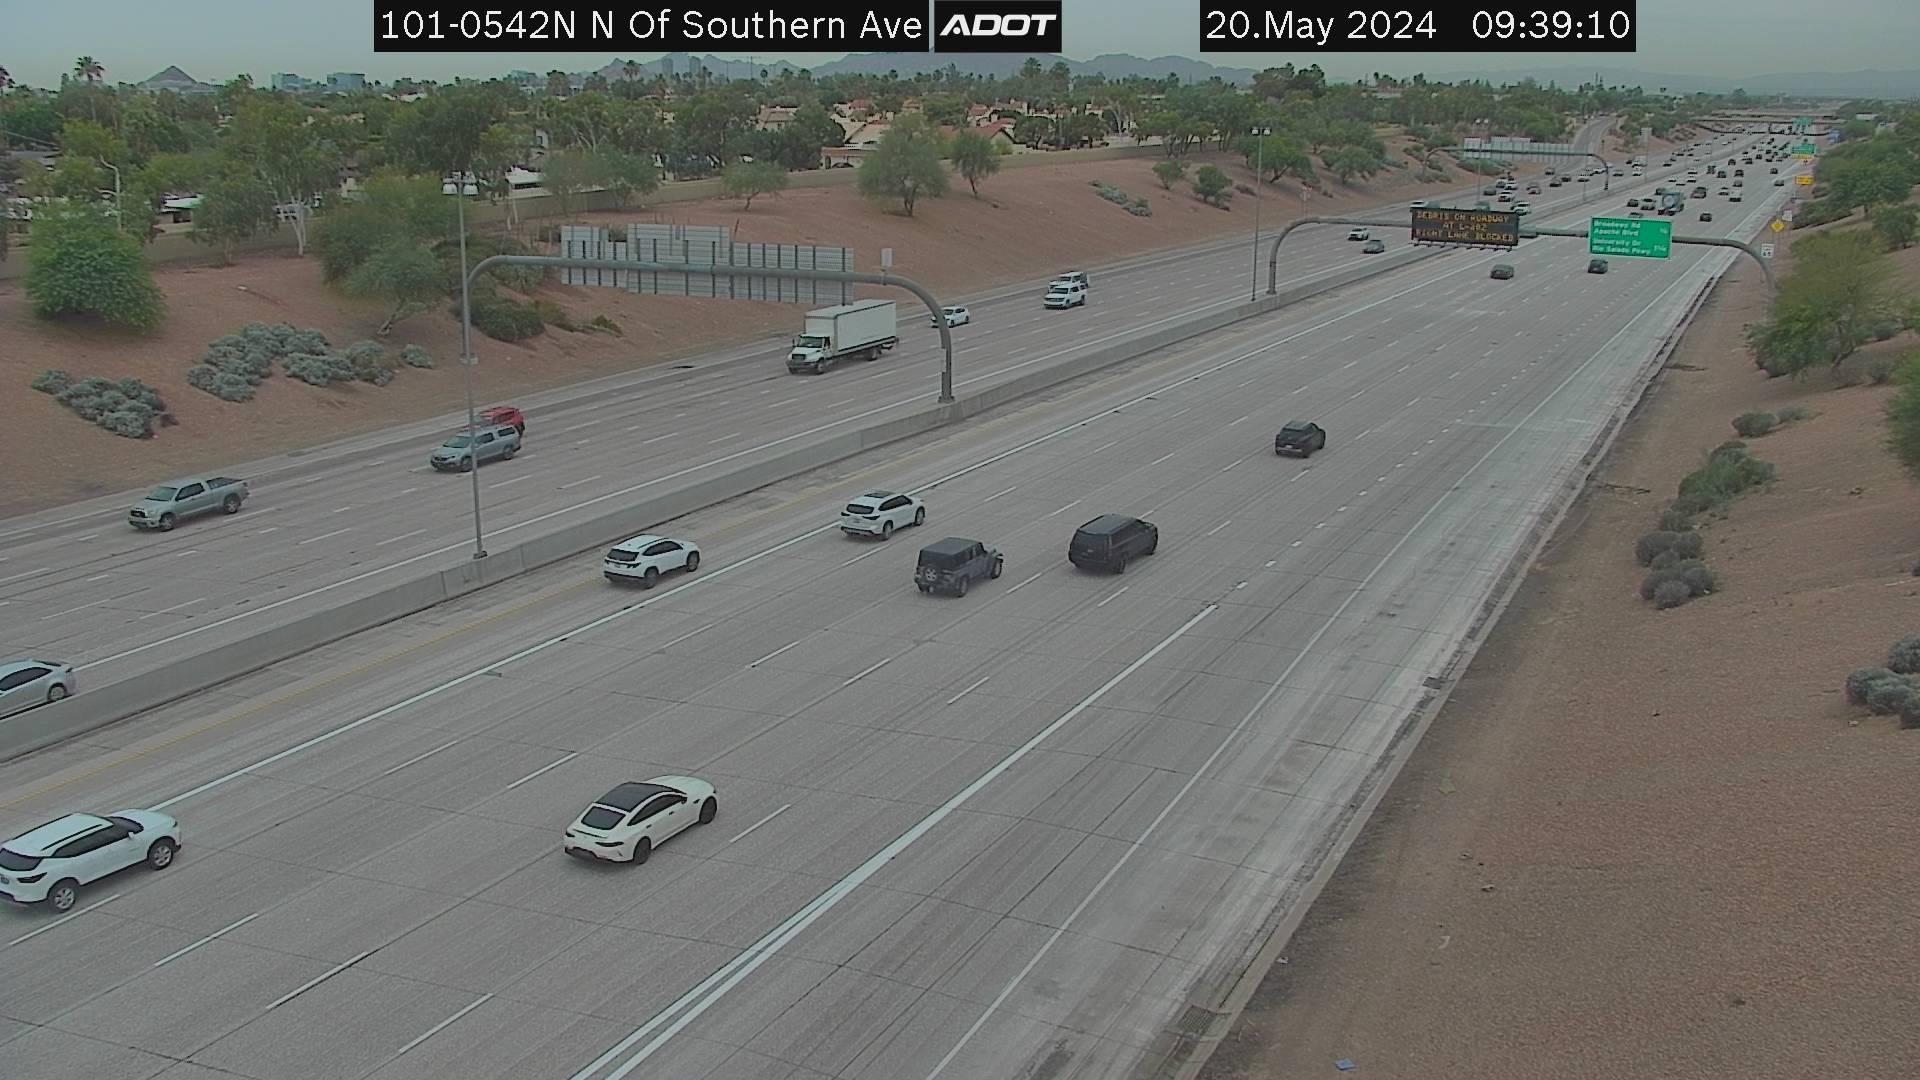 Traffic Cam Tempe › North: L-101 NB 54.23 @N of Southern Player